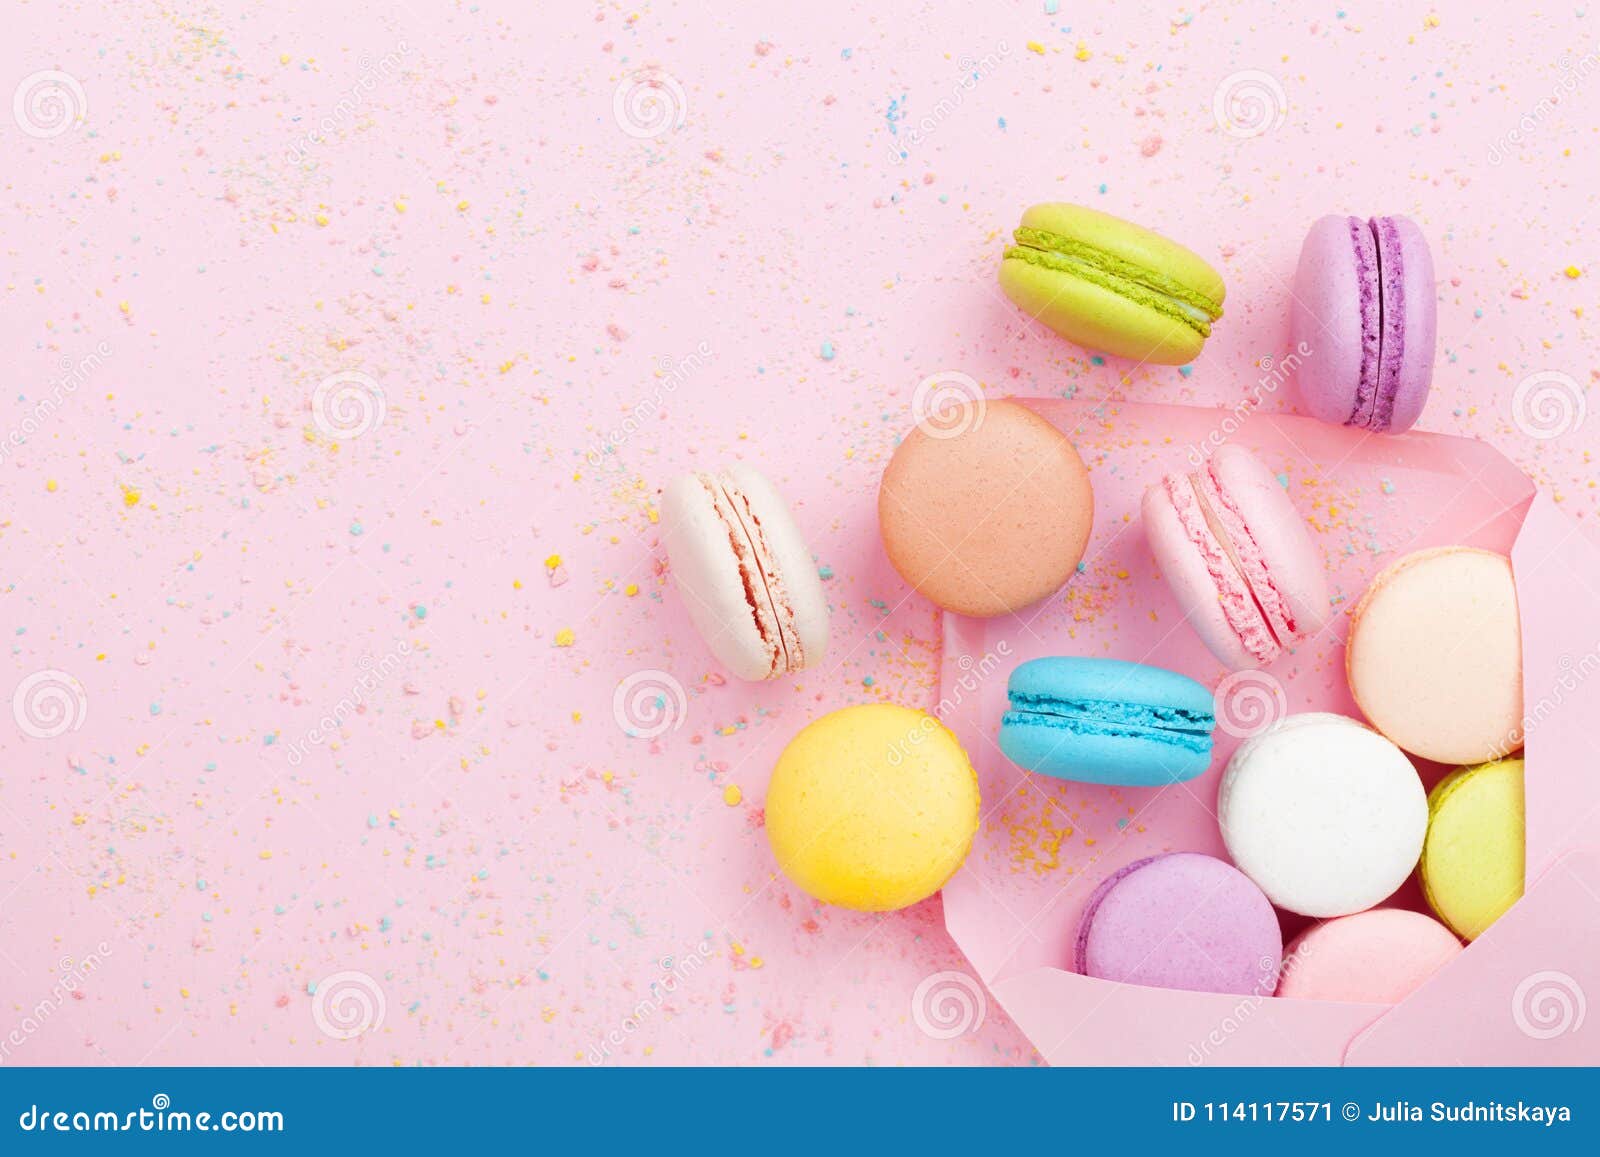 creative composition with envelope and cake macaron or macaroon on pink pastel background top view. flat lay.